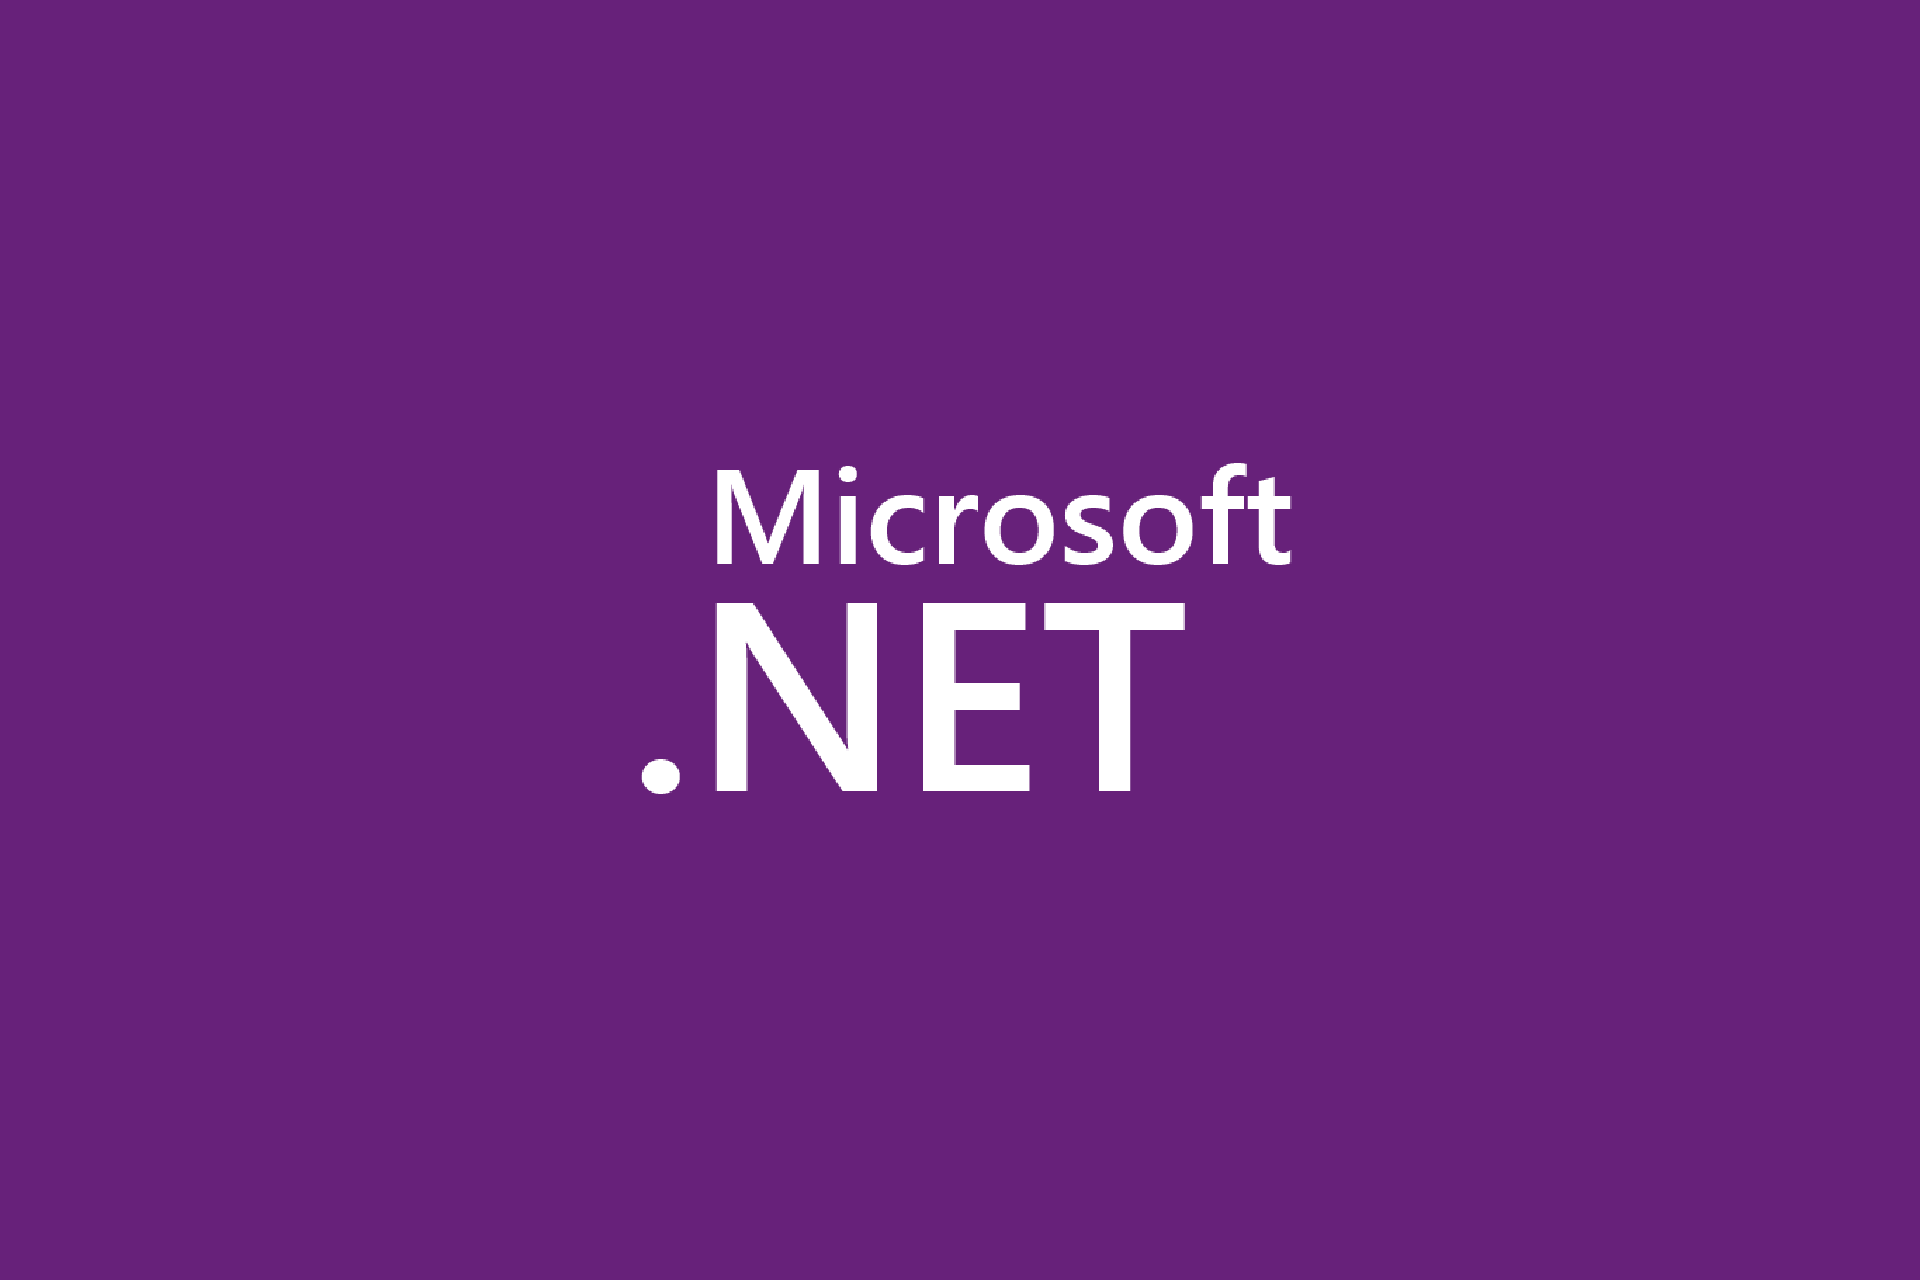 .NET (pronounced dot net) is a framework that provides programming guidelines that can be used to develop a wide range of applications from the web to mobile to Windows-based applications.